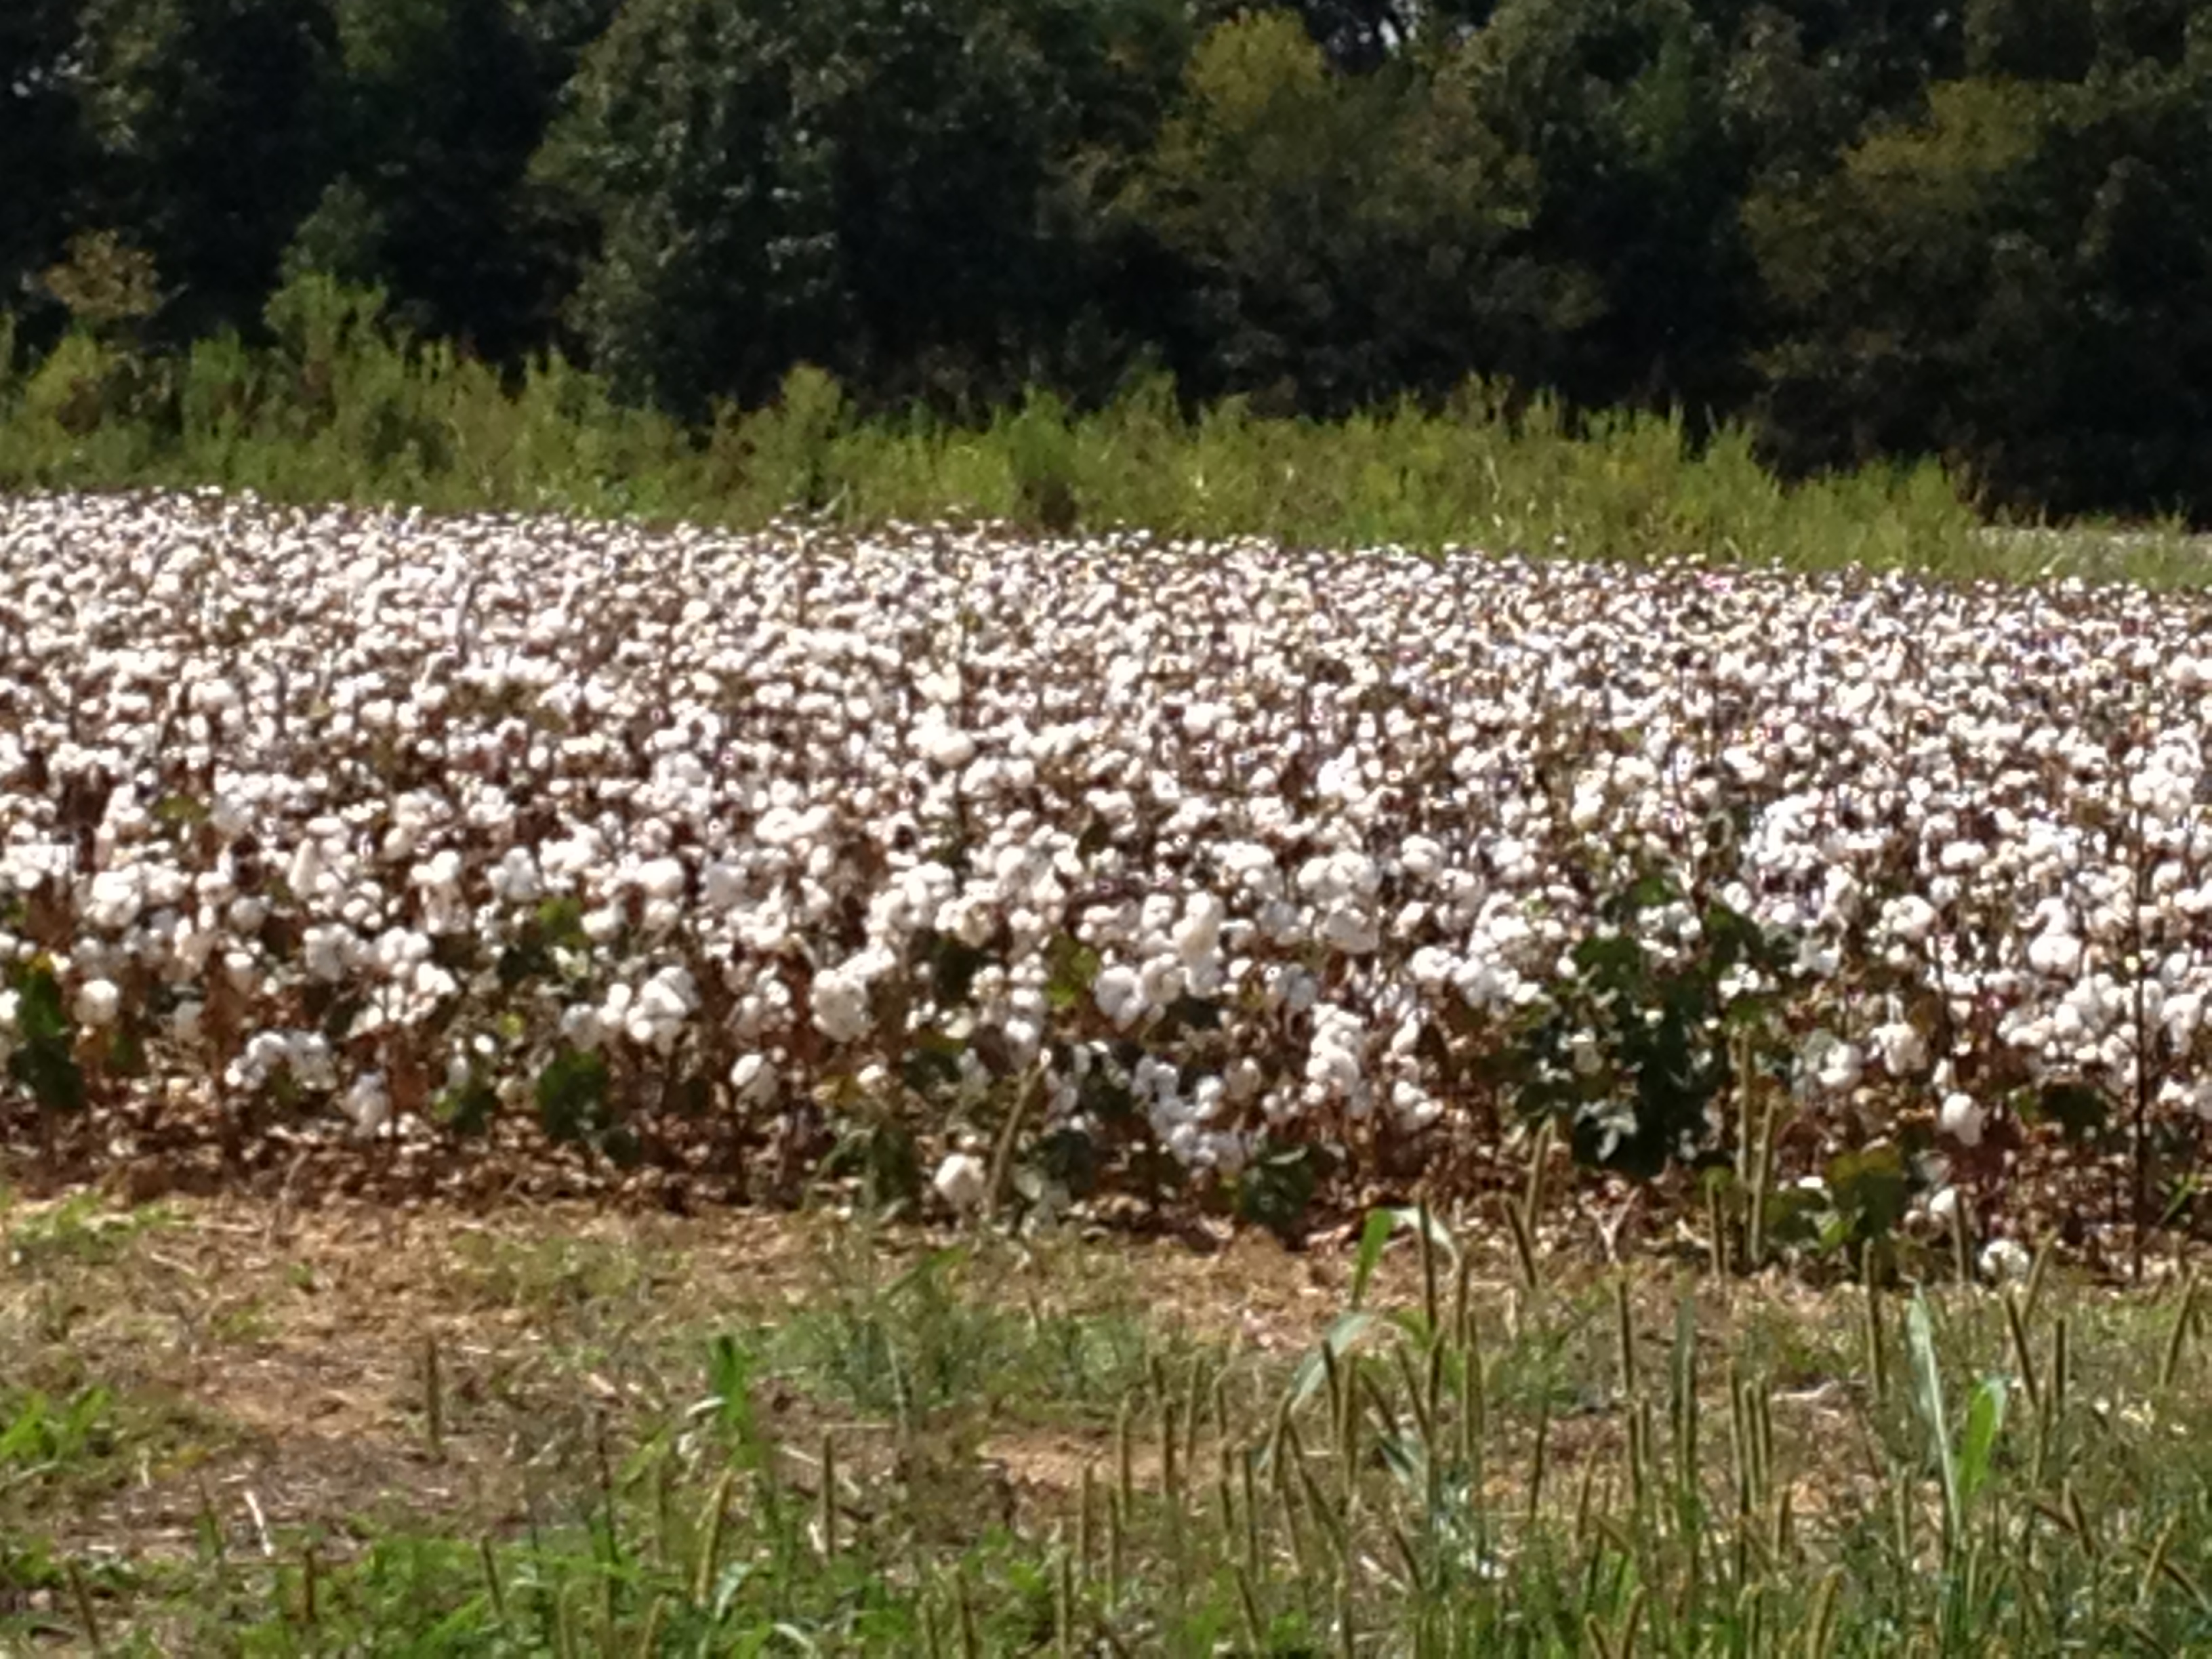 The Cotton Bolls are in Full Bloom